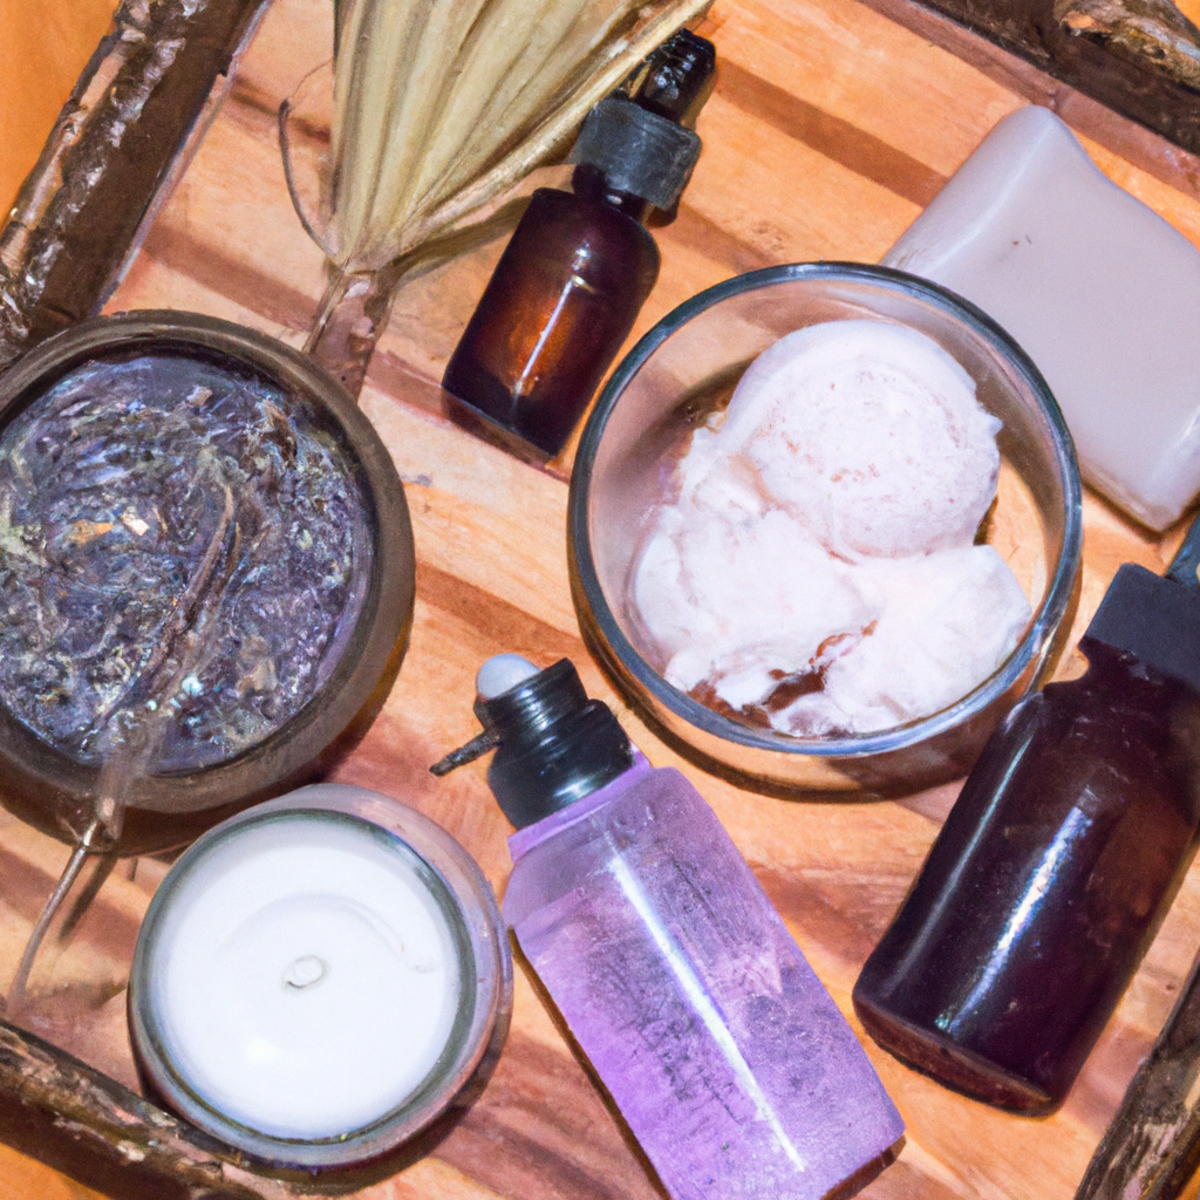 Get ready to glow with these all-natural skin care routines! From rosewater toner to exfoliating scrub, this wooden tray has everything you need for a healthy and radiant complexion. Say goodbye to harsh chemicals and hello to organic ingredients that will leave your skin feeling nourished and refreshed.